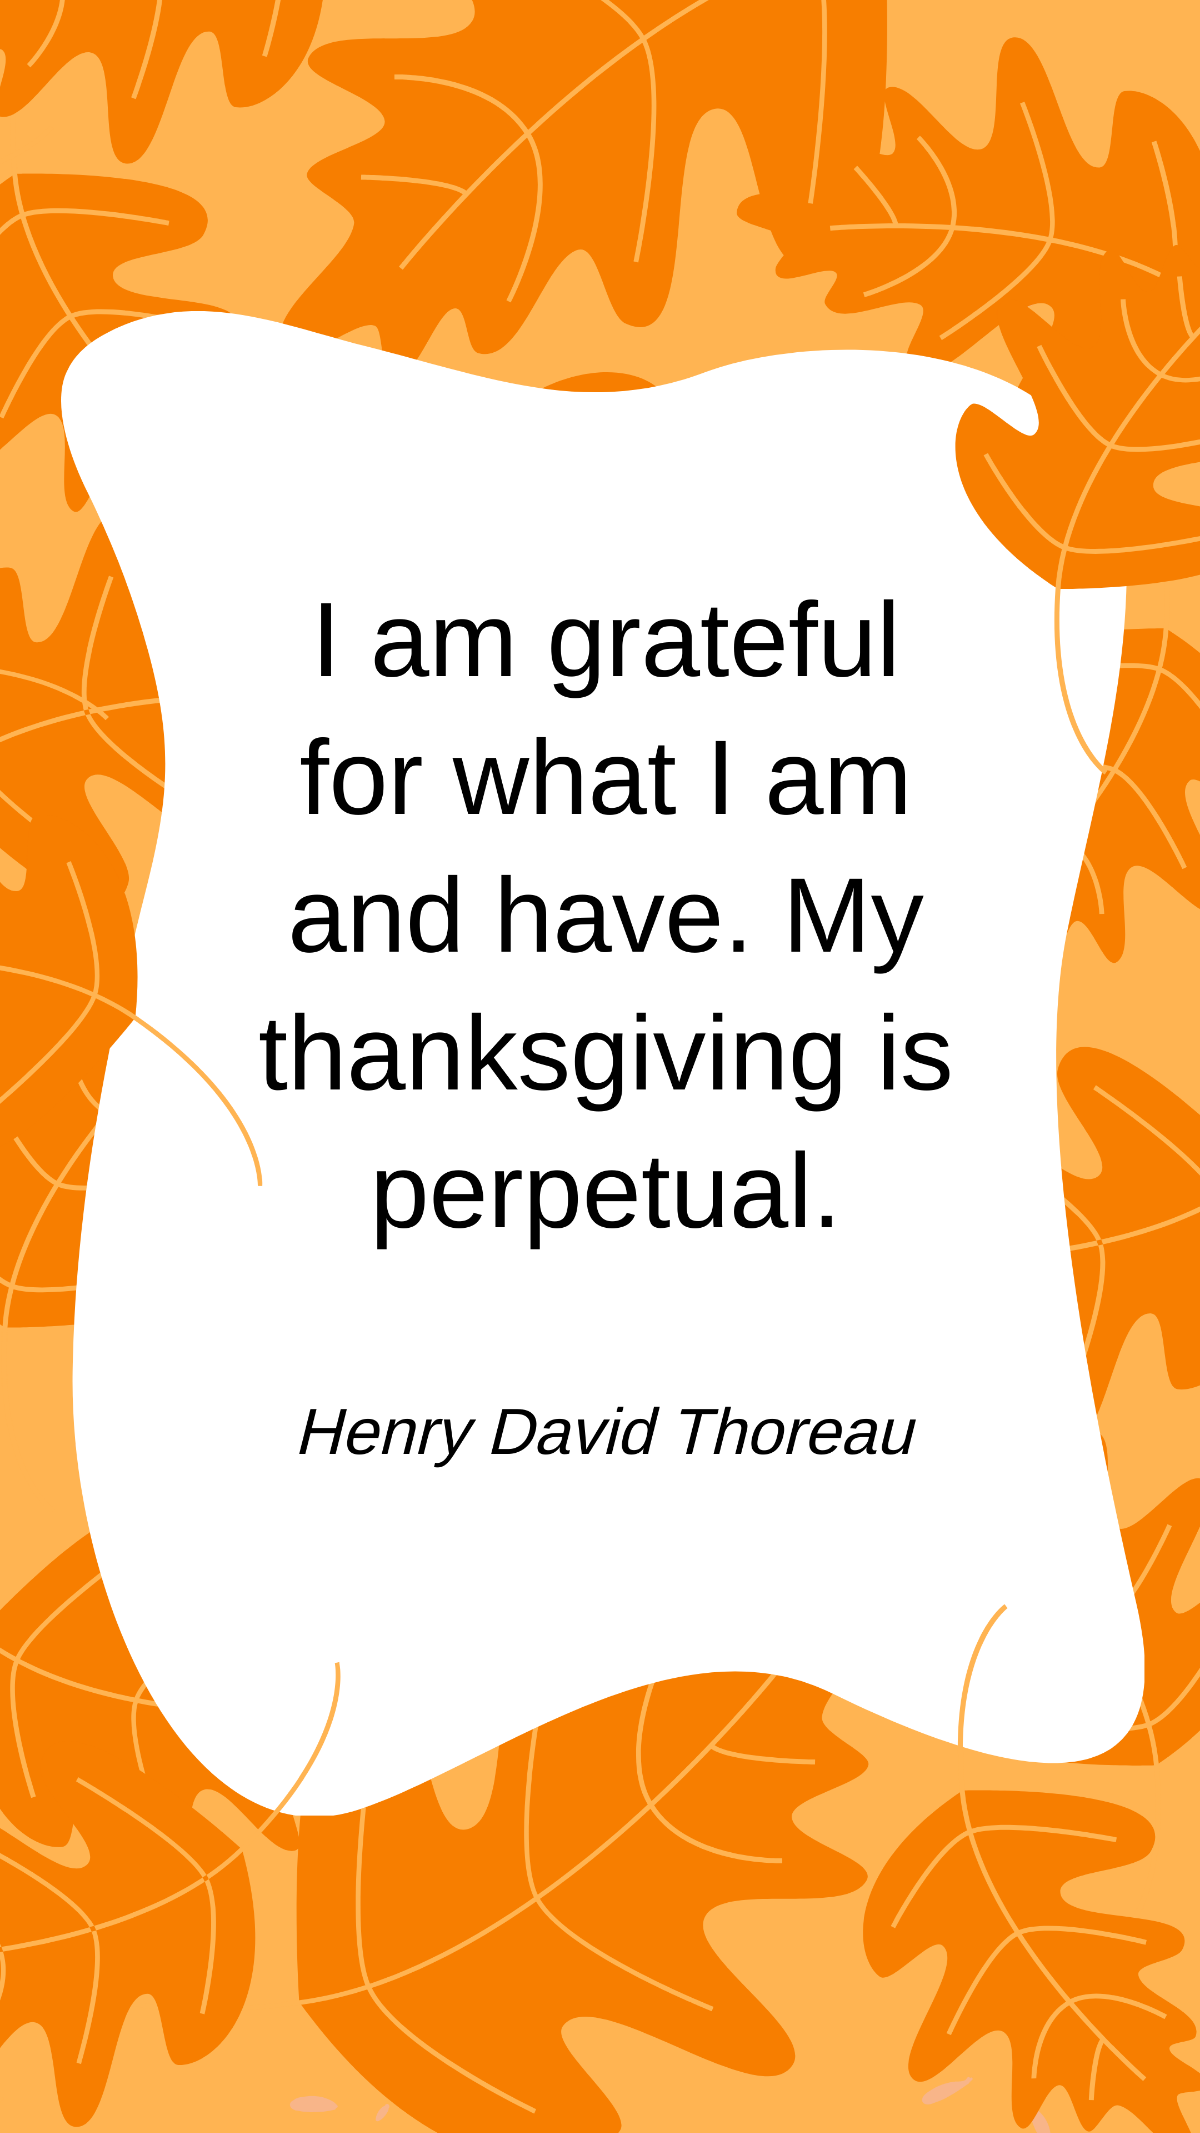 Henry David Thoreau - I am grateful for what I am and have. My thanksgiving is perpetual. Template